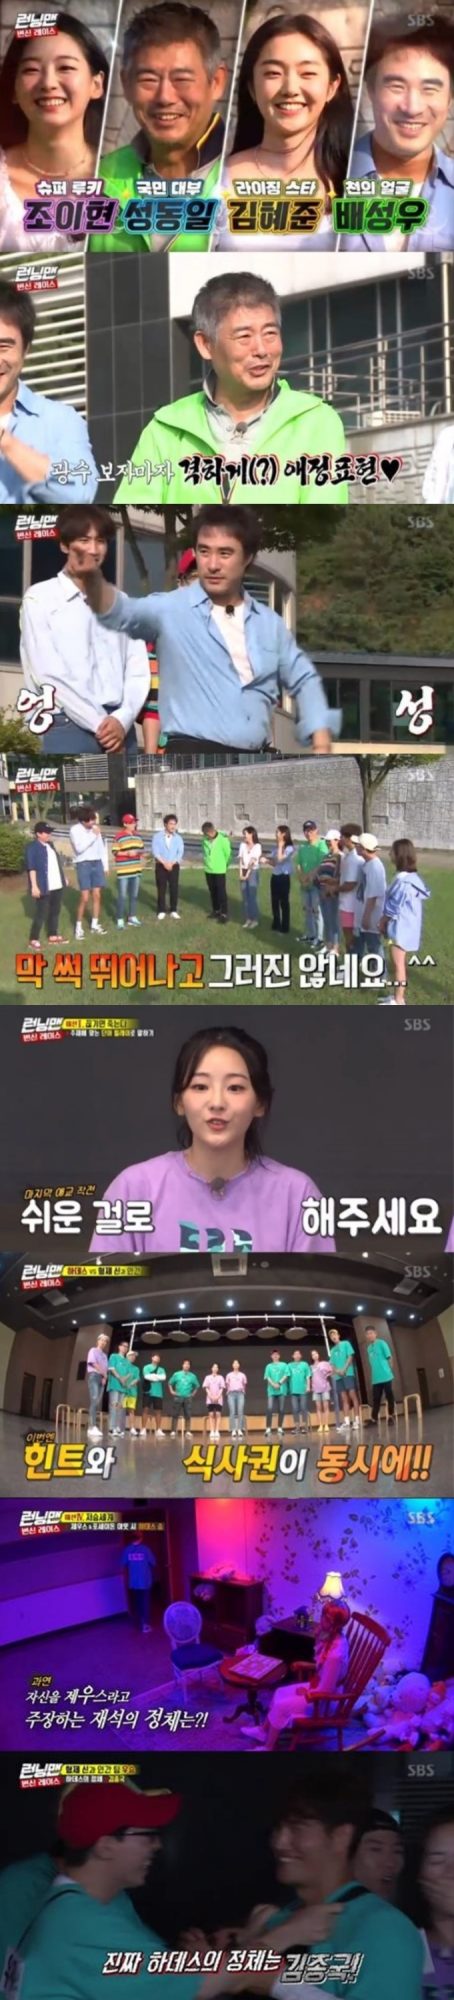 SBS Running Man took the top spot in the same time zone of 2049 target audience rating with a big gap.According to Nielsen Korea, the ratings agency, Running Man, which aired on the 11th, soared to 8.4% of the highest audience rating per minute, and the 2049 target audience rating, which is an important indicator of major advertising officials, recorded 3.7% (based on the second part of the audience rating of households in the metropolitan area), beating MBC Masked Wang, KBS2 and Donkey Ears.On the same day, actors Sung Dong-il, Bae Seong-woo, Jo Yi-hyun and Kim Hye-joon of the movie Transform appeared and performed Transform Race together.The members challenged various missions to find Hades, Zeus, and Poseidon gods, and a chewy race was held to the end.Among them, the performance of the guests was brilliant. Sung Dong-il imposed a penalty directly by tightening Lee Kwang-soo breath like Lee Kwang-soo natural enemy.Bae Seong-woo laughed with the charm of introducing a clumsy ballet.The final mission was decorated with the horror special The Underworld Race.In order for the brothers and men to win the championship, they have to make Hades in-N-Out Burger, and if Hades makes Zeus and Poseidon in In-N-Out Burger, Hades will win alone.The members gathered hints at the appearance of ghosts in the race, and Yoo Jae-Suk and Kim Jong-kook were selected as candidates for Hades.In the meantime, Yoo Jae-Suk put Kim Jong-kooks name tag on the Hades chair that Lee Kwang-soo found, and finally Hades was revealed as Kim Jong-kook.The scene recorded the highest audience rating of 8.4% per minute, accounting for the best one minute.